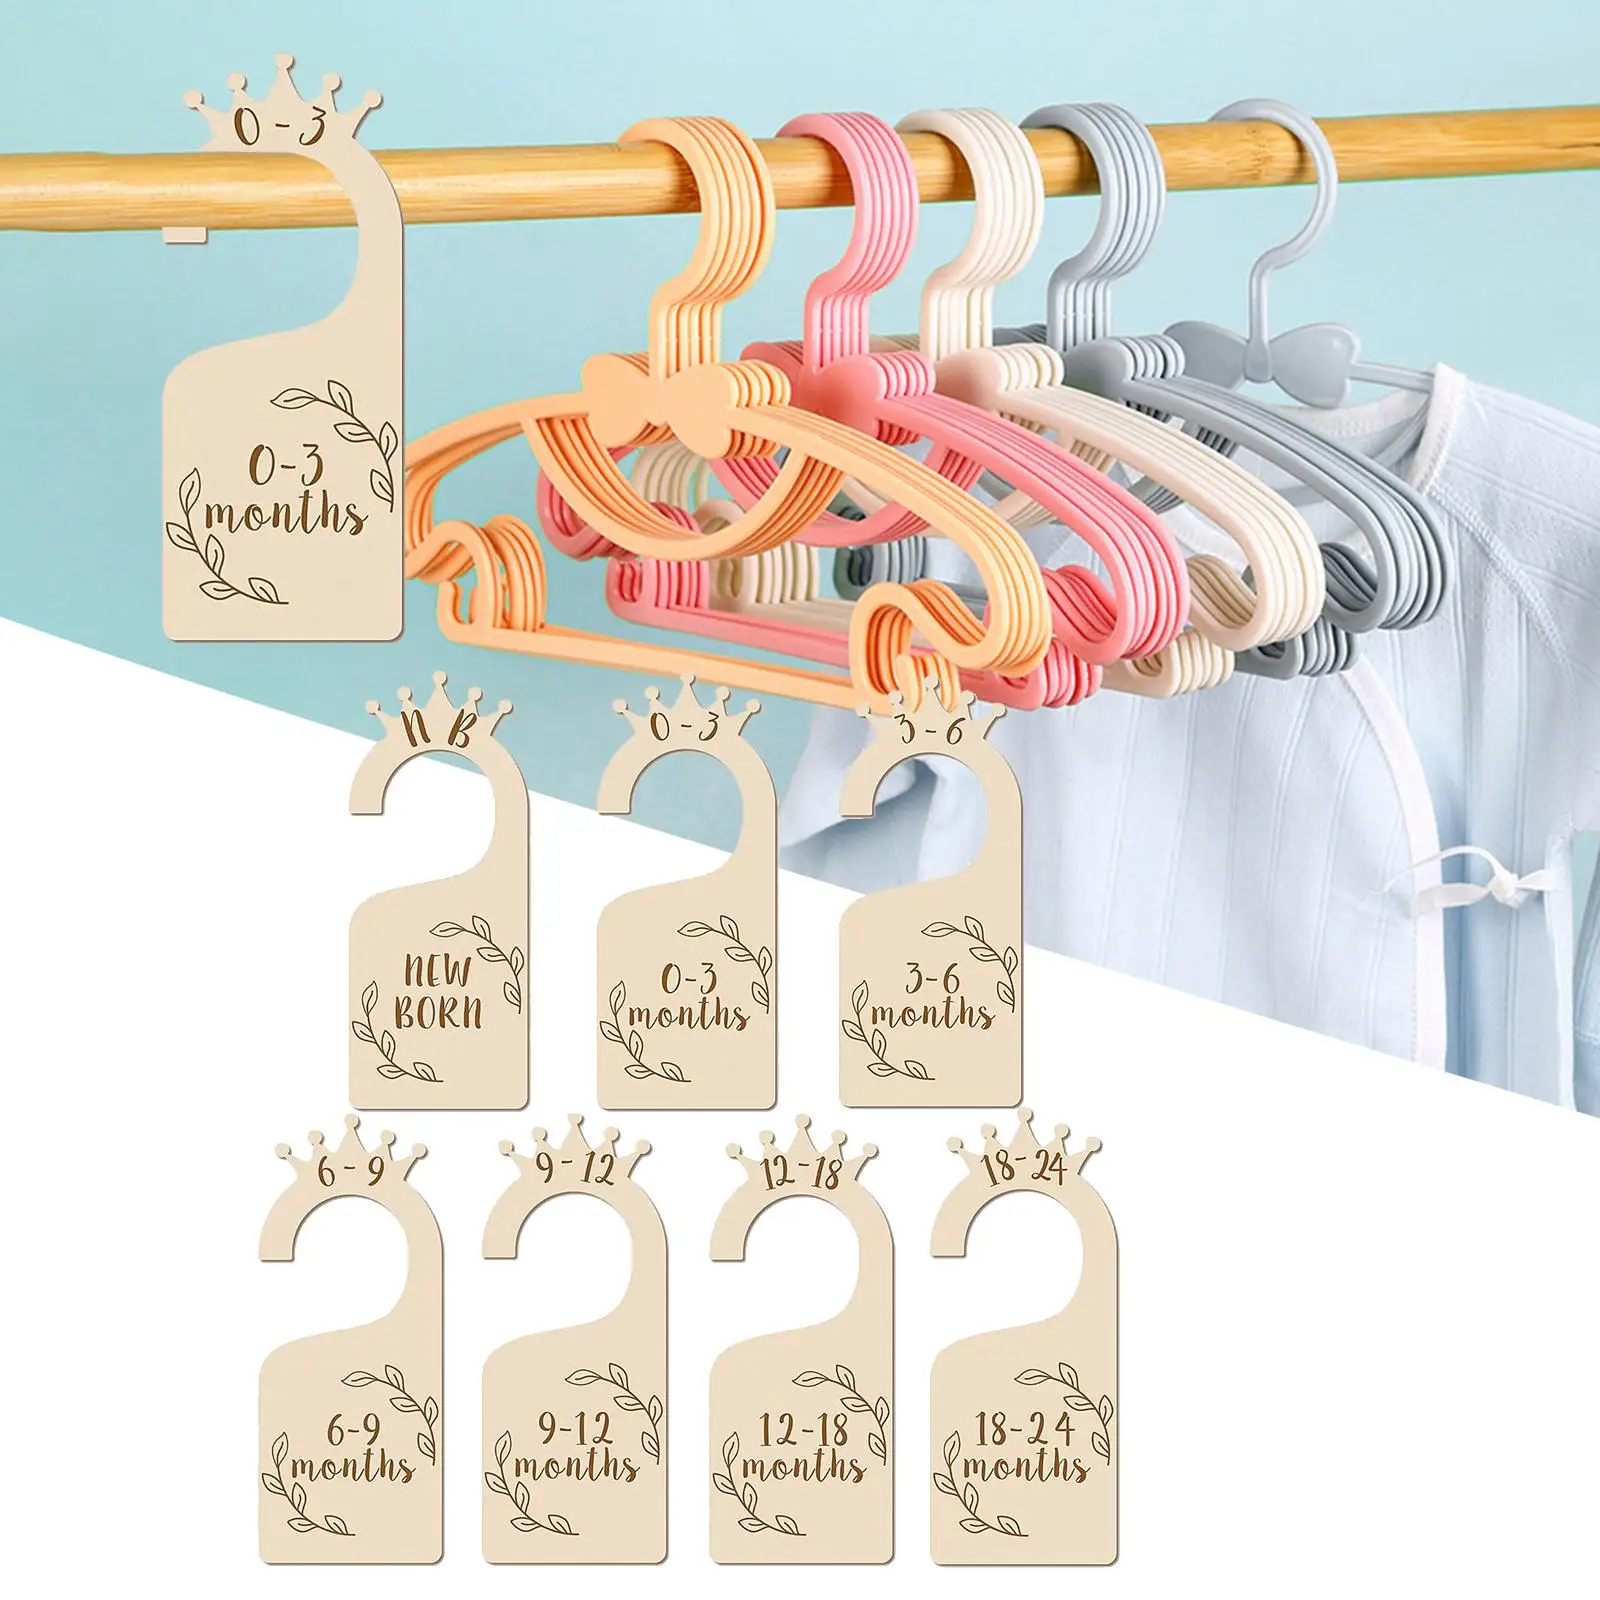 7Pcs Newborn Wardrobe Divider Clothing Size Age Dividers for Daily room